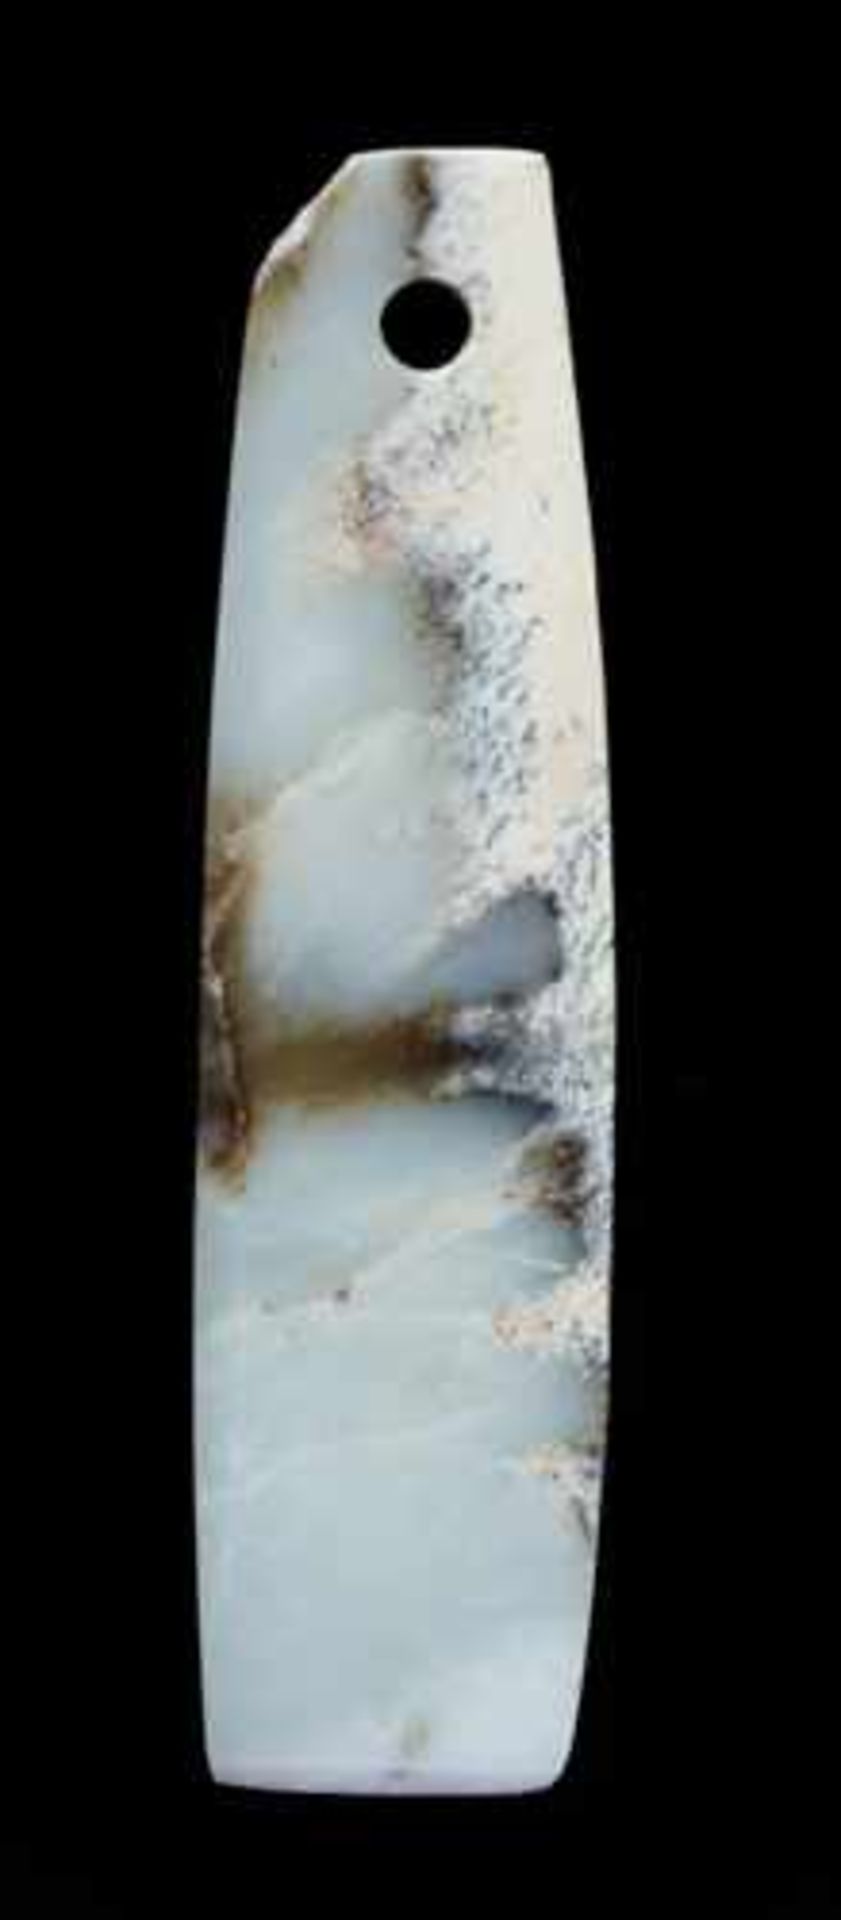 A STRIKING MARBLE-LIKE BEN BLADE IN WHITE JADE Jade, China. Early Bronze Age, Qijia Culture, c.